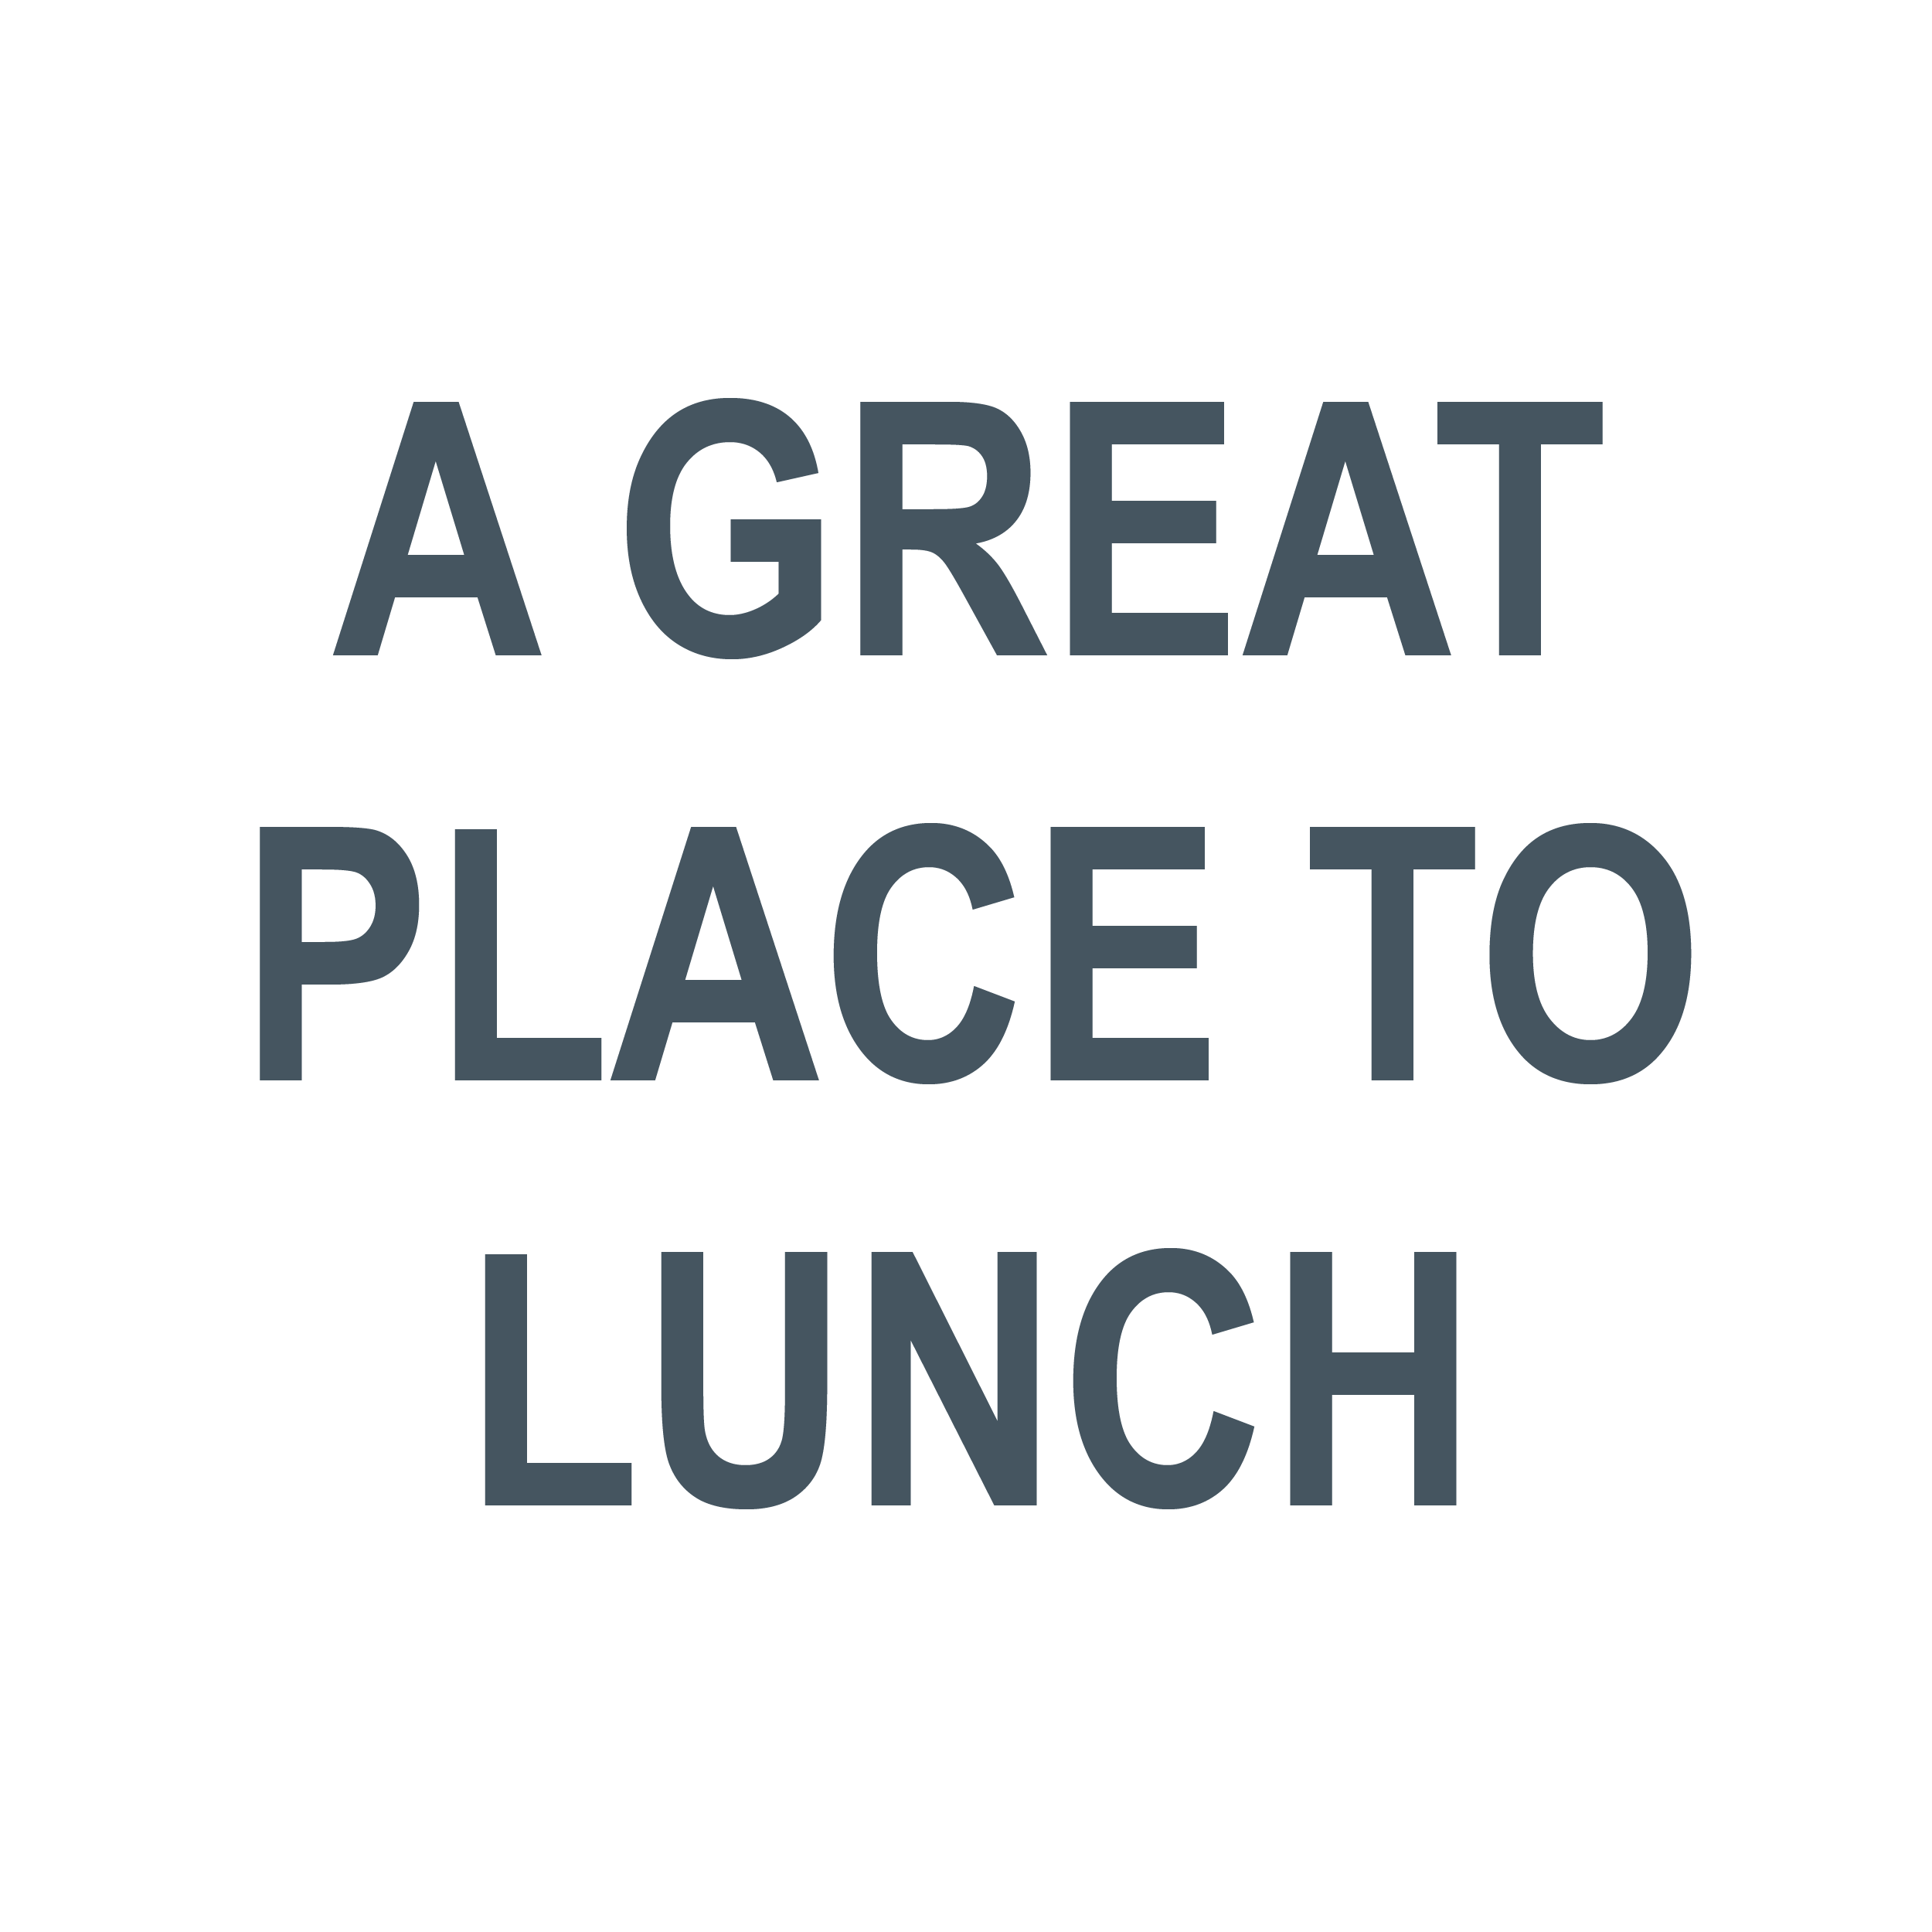 A great place to lunch - Bunt & Associates: Transportation Planners